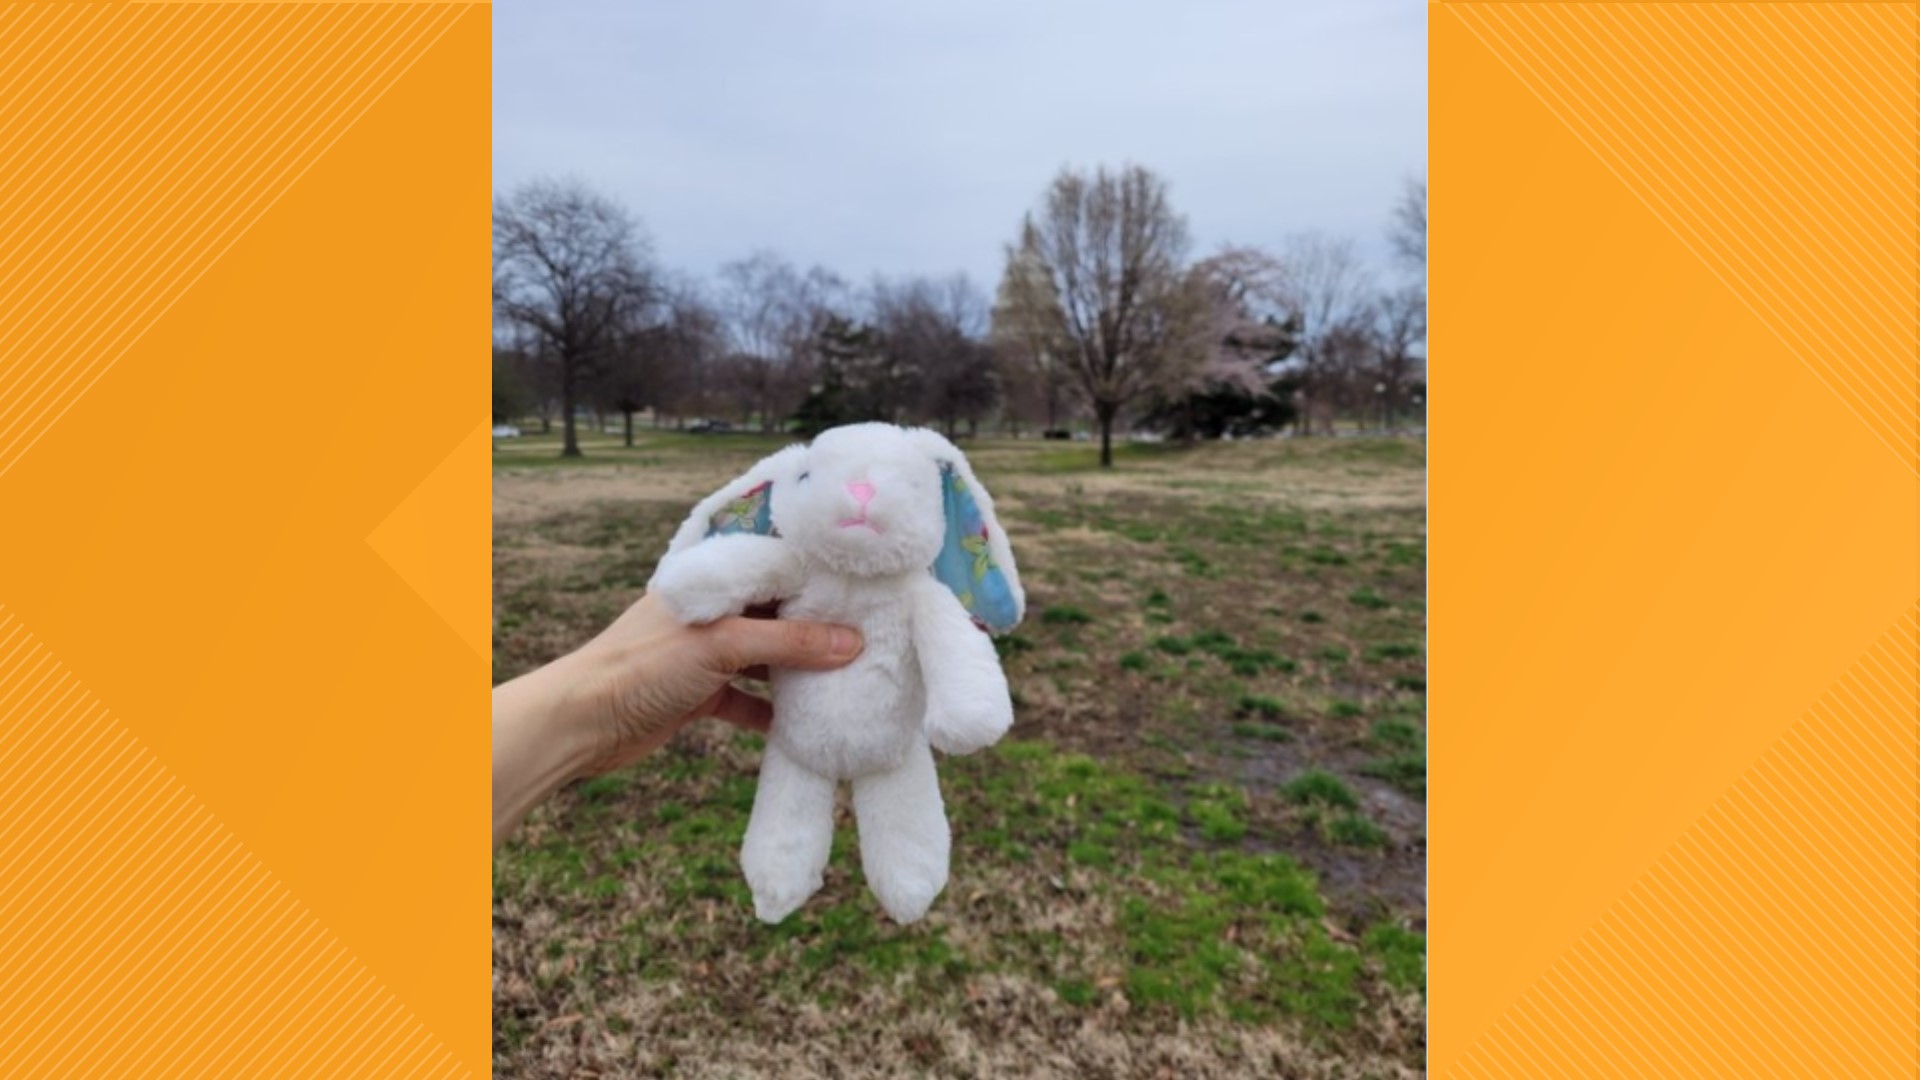 A woman who lives on Capitol Hill turned to social media to reunite the little bunny with their owner.